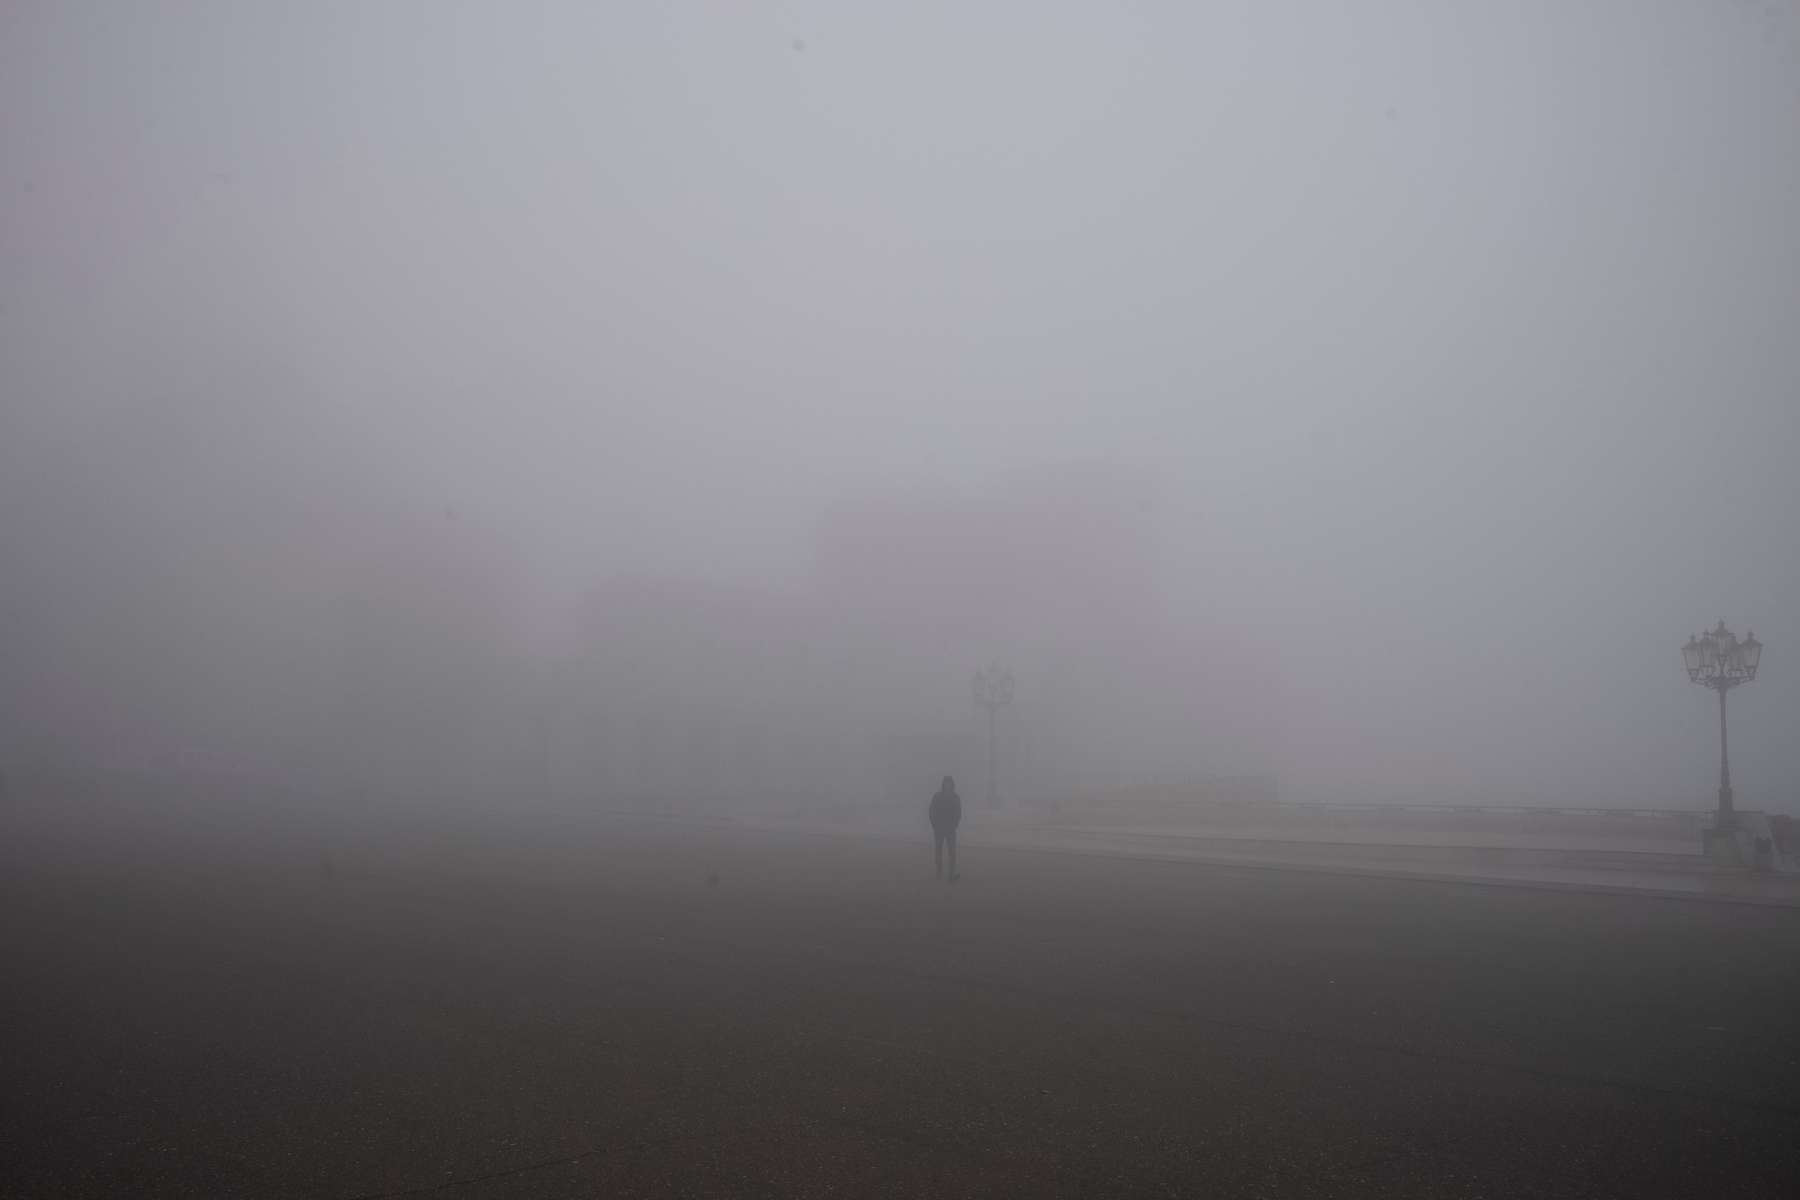 A young man walks through the main square of Nagorno Karabakh’s capital city to meet one of the busloads of returning Armenian families who had been been displaced by the war.  People often talk about the fog of war, but the fog of the aftermath is just as pervasive. It engulfs the moment and spreads outward, blurring the edges so that the past is obscured, the future impossible. As busloads of displaced families make their way back to Karabakh, the weather seems complicit with the uncertainty that hangs heavy in the air. The city of Stepanakert is enveloped in a fog so thick, returnees have no idea what they are returning to.